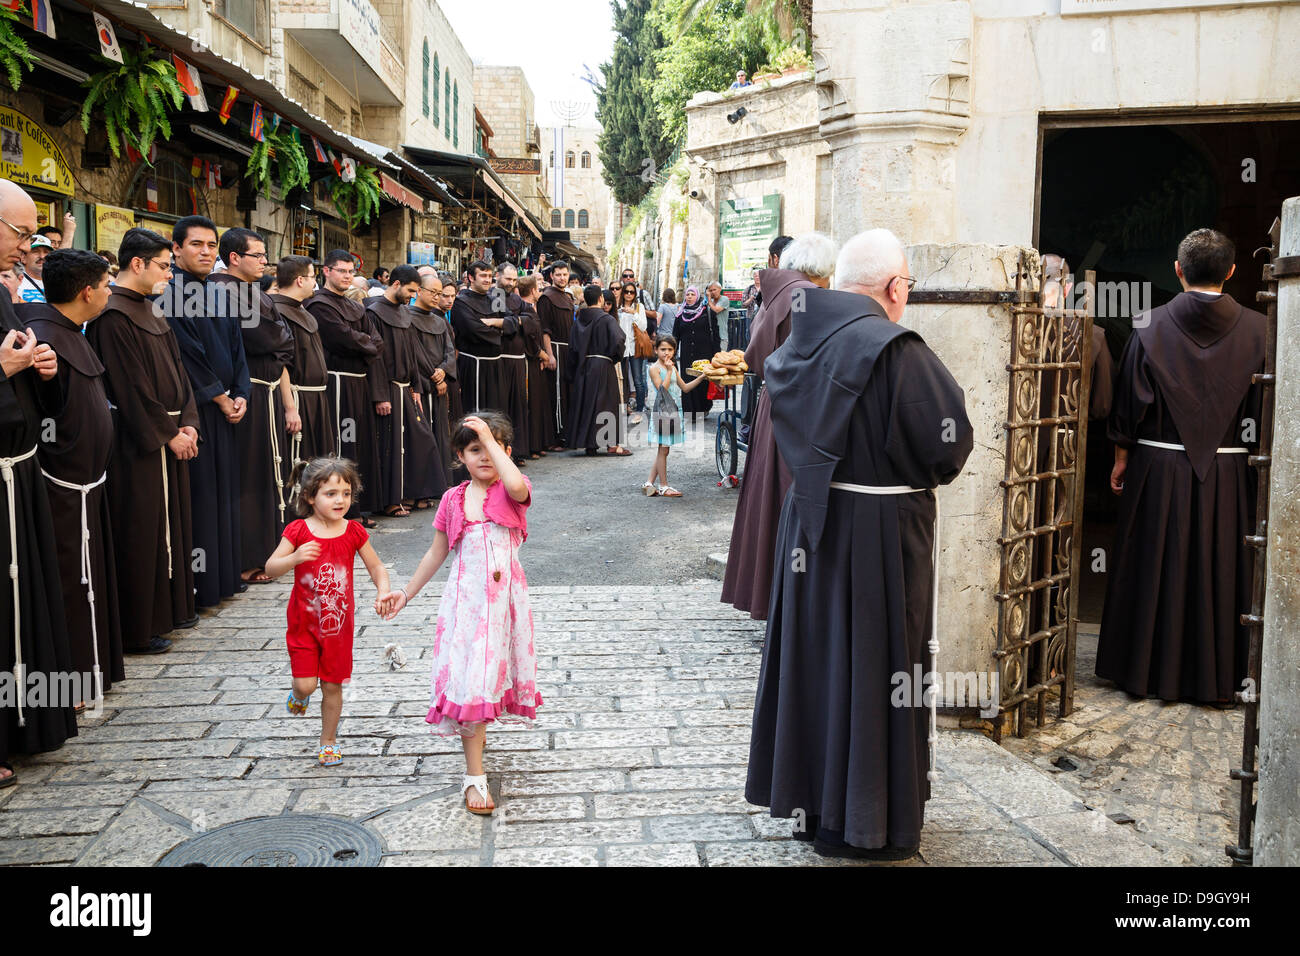 Franciscan monks at the Via Dolorosa during their regular friday procession in the old city, Jerusalem, Israel. Stock Photo